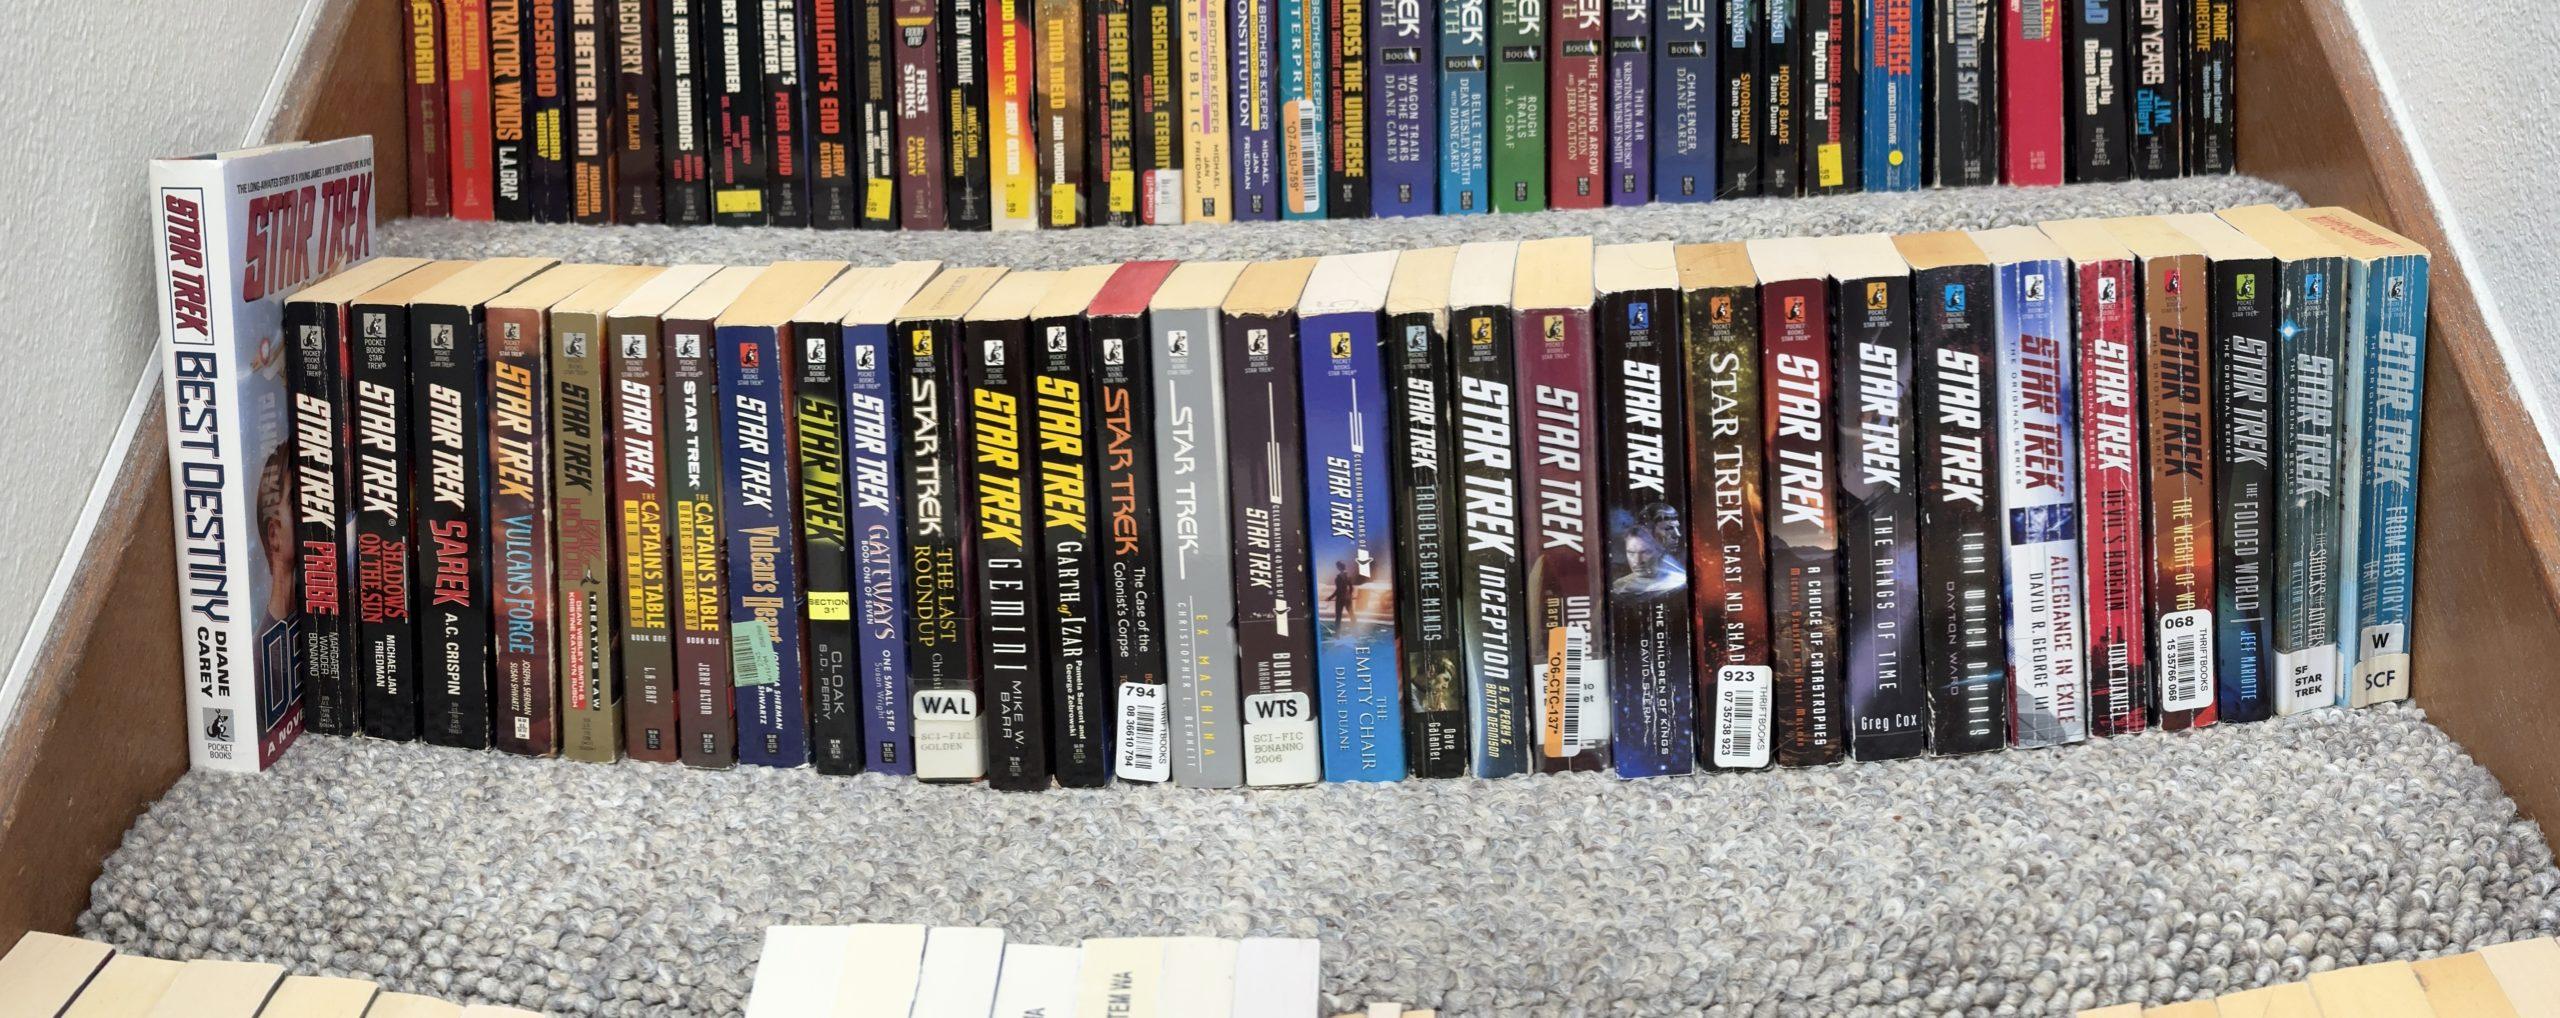 Panoramic shot of about 40 Star Trek novels across a staircase step.